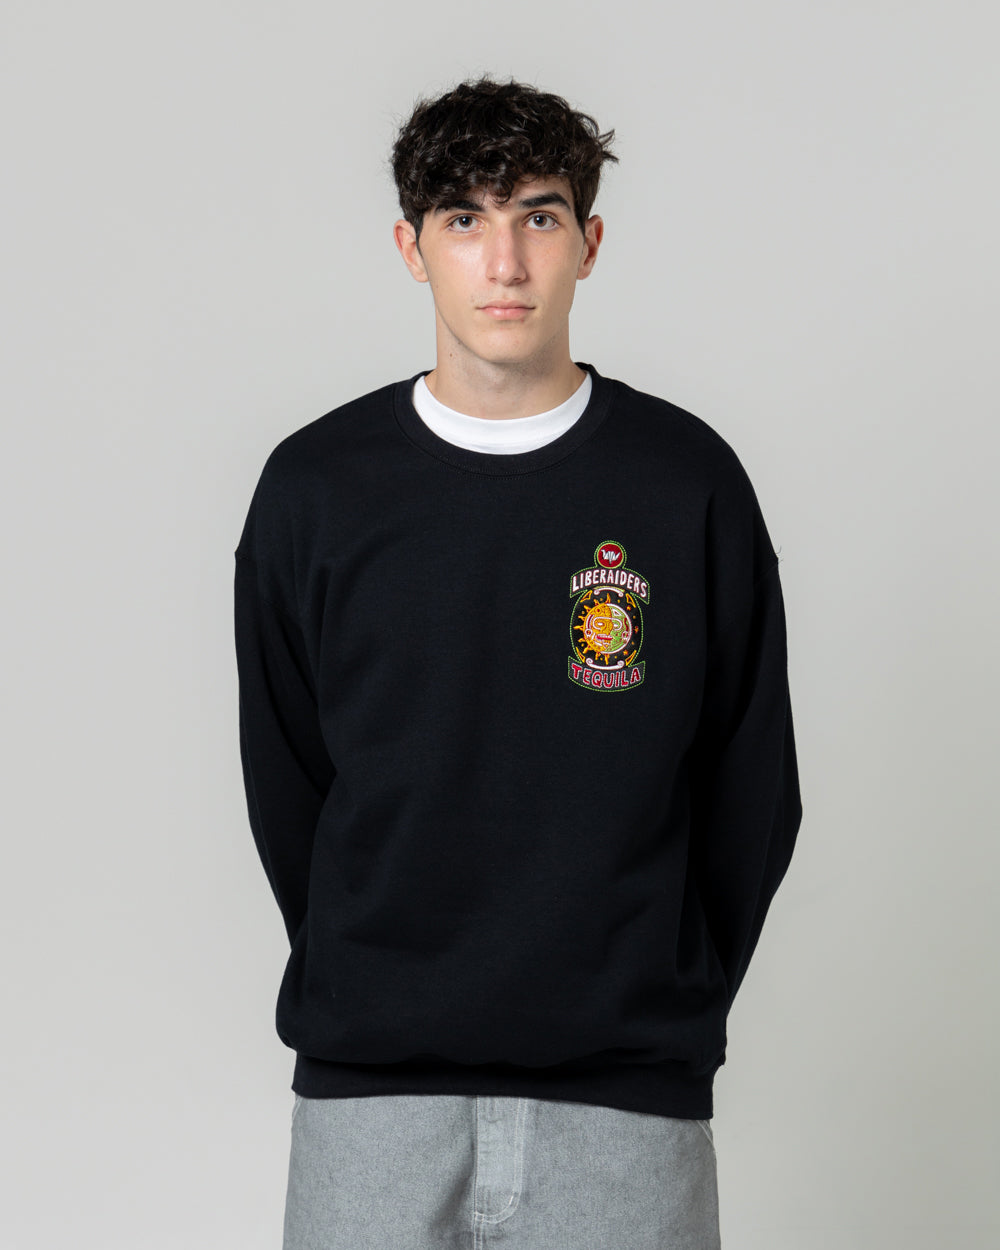 One For The Road Crewneck | Black